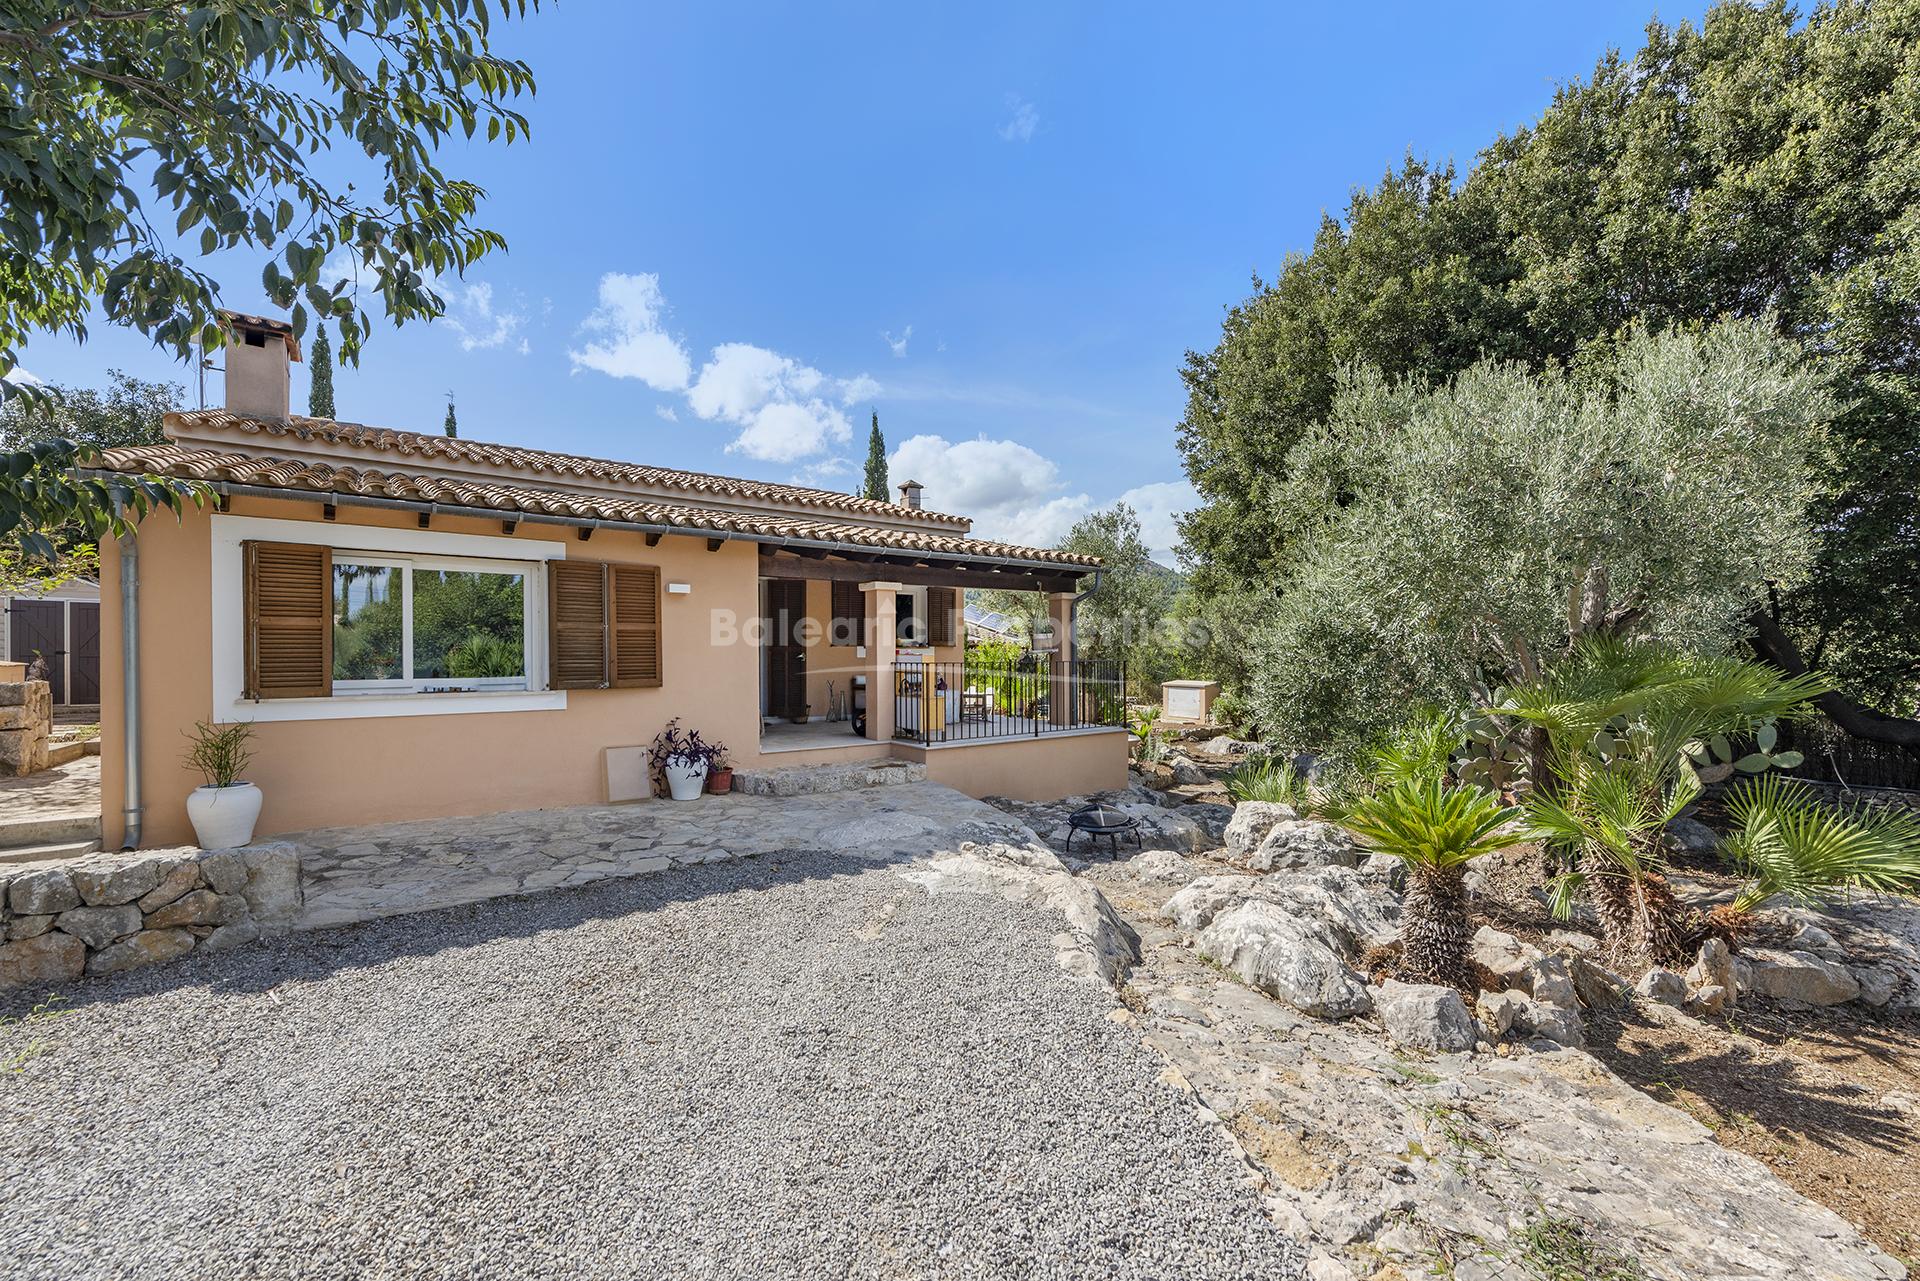 Country villa with guest house for sale in a peaceful area of Pollensa, Mallorca